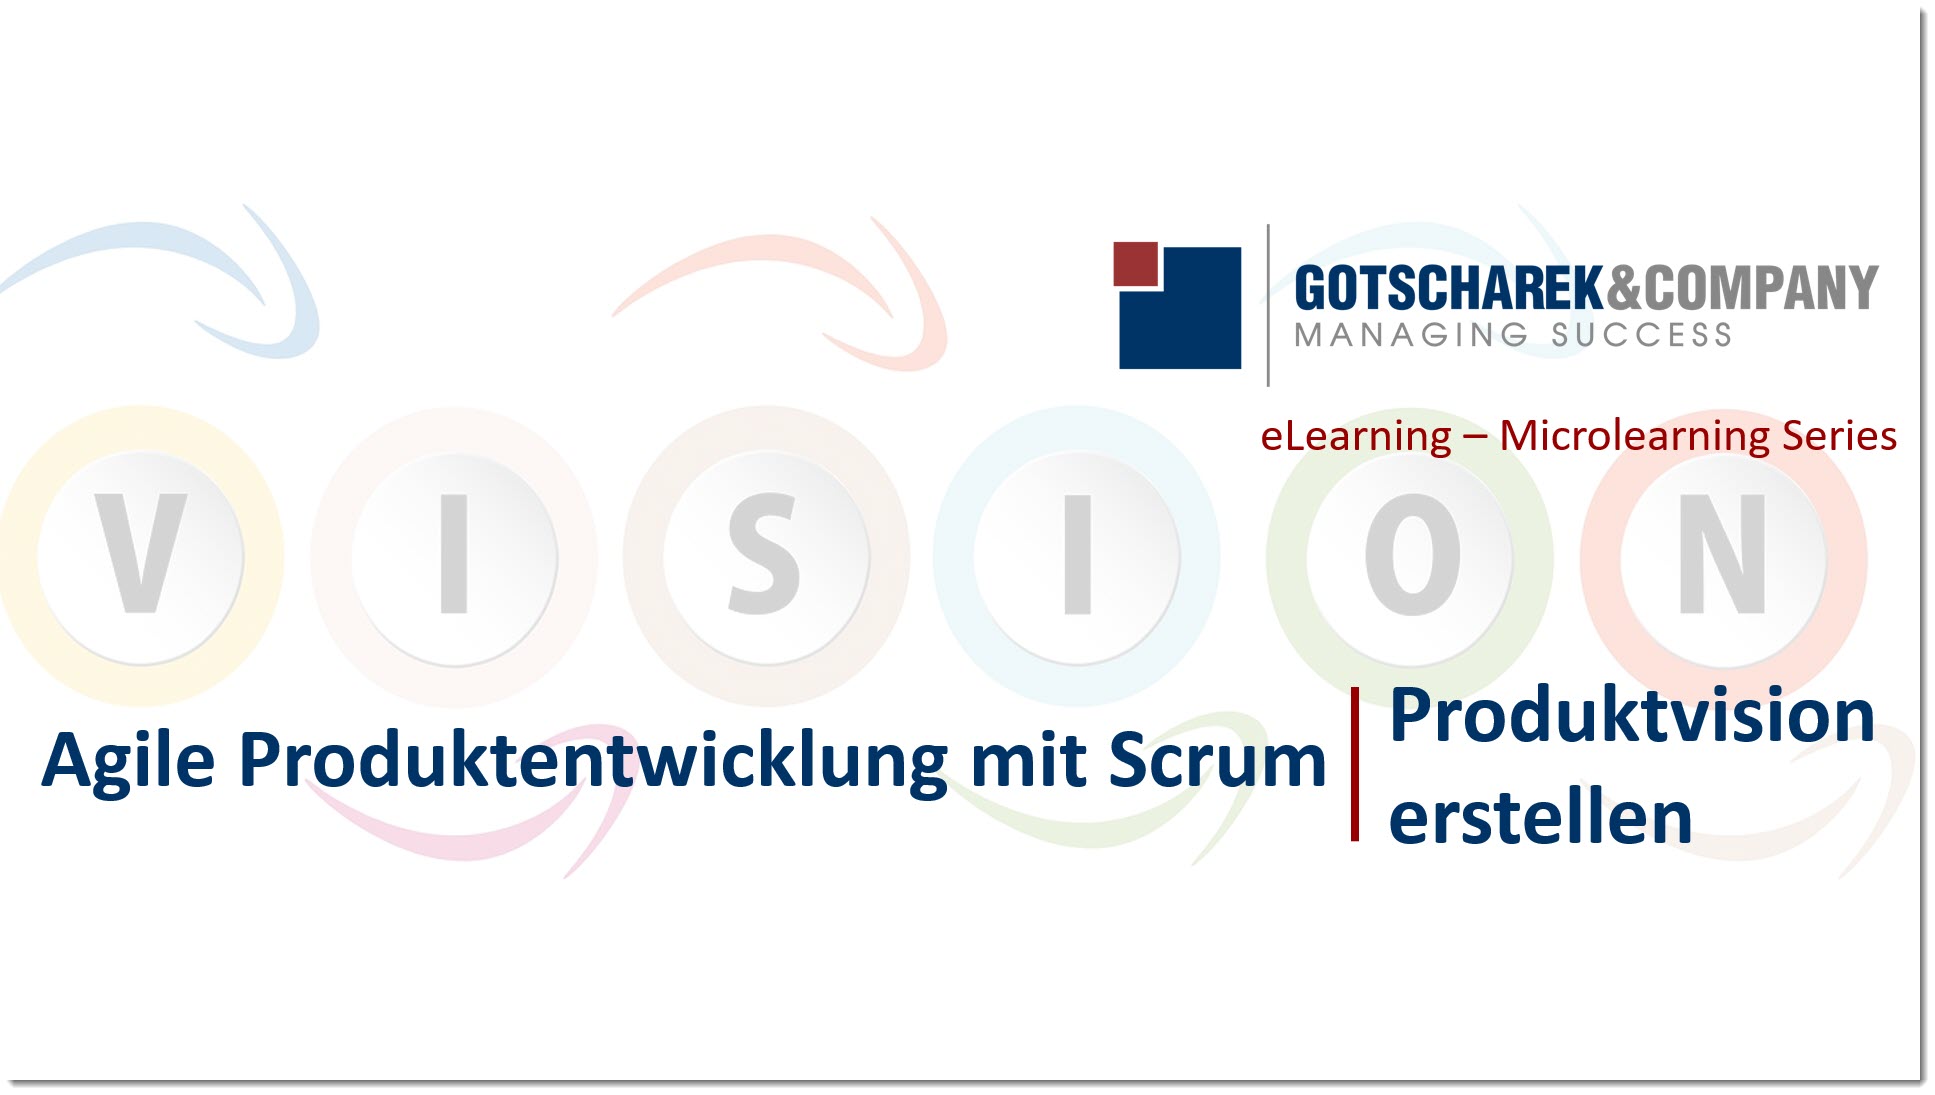 Microlearning Scrum - Product Vision erstellen
